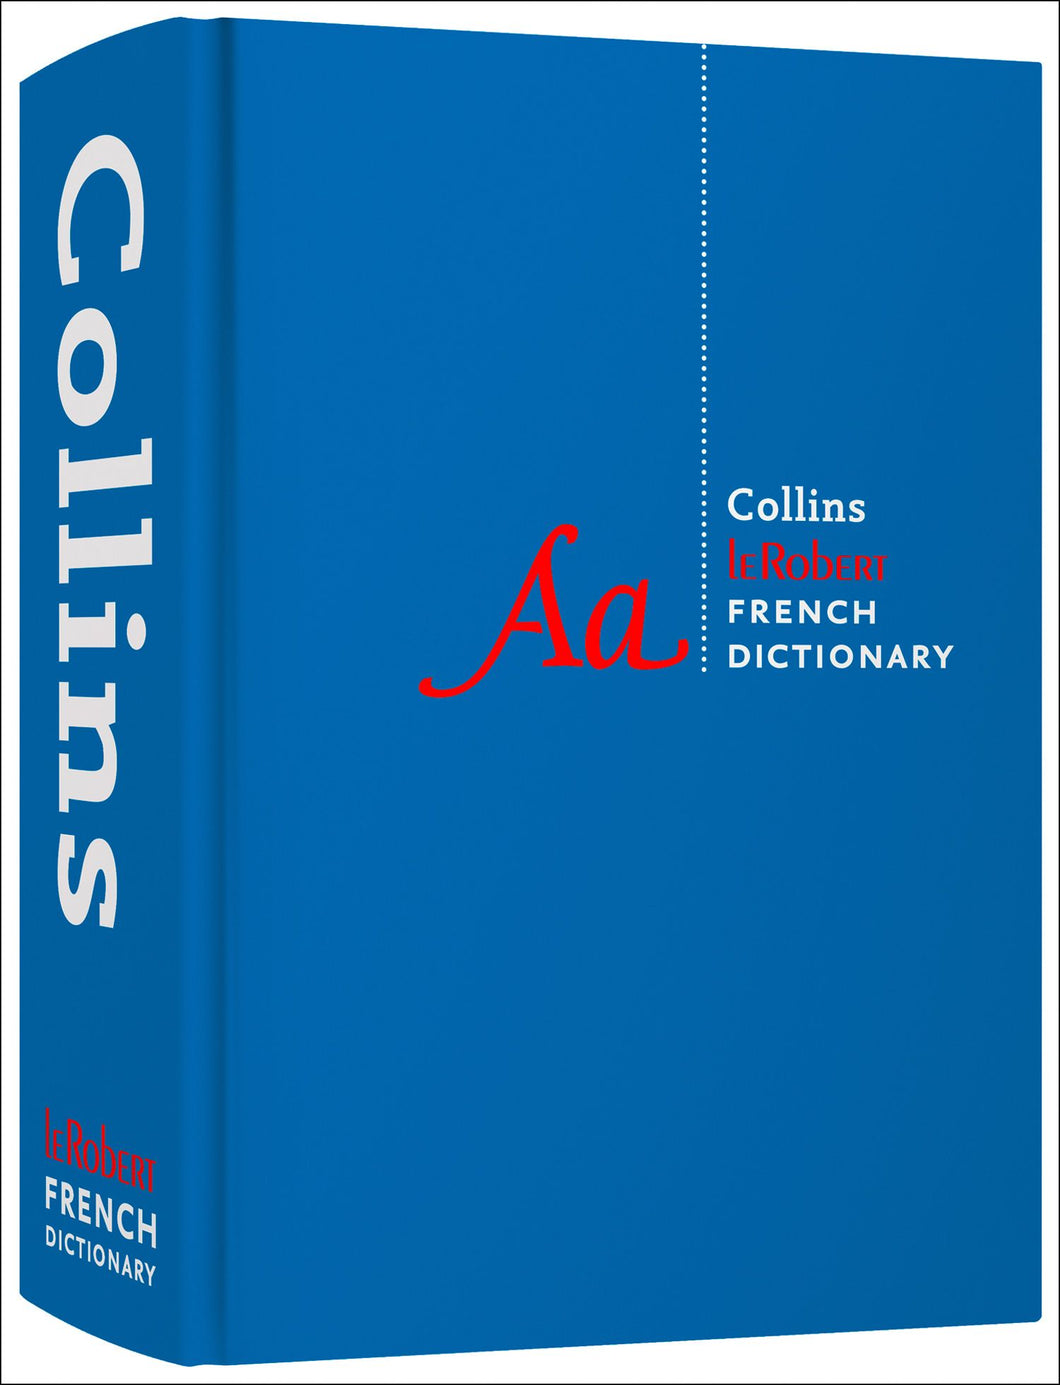 Collins Robert French Dictionary Complete (11ed) (OUT OF PRINT) Contact the store 0422 522 007 to discuss options